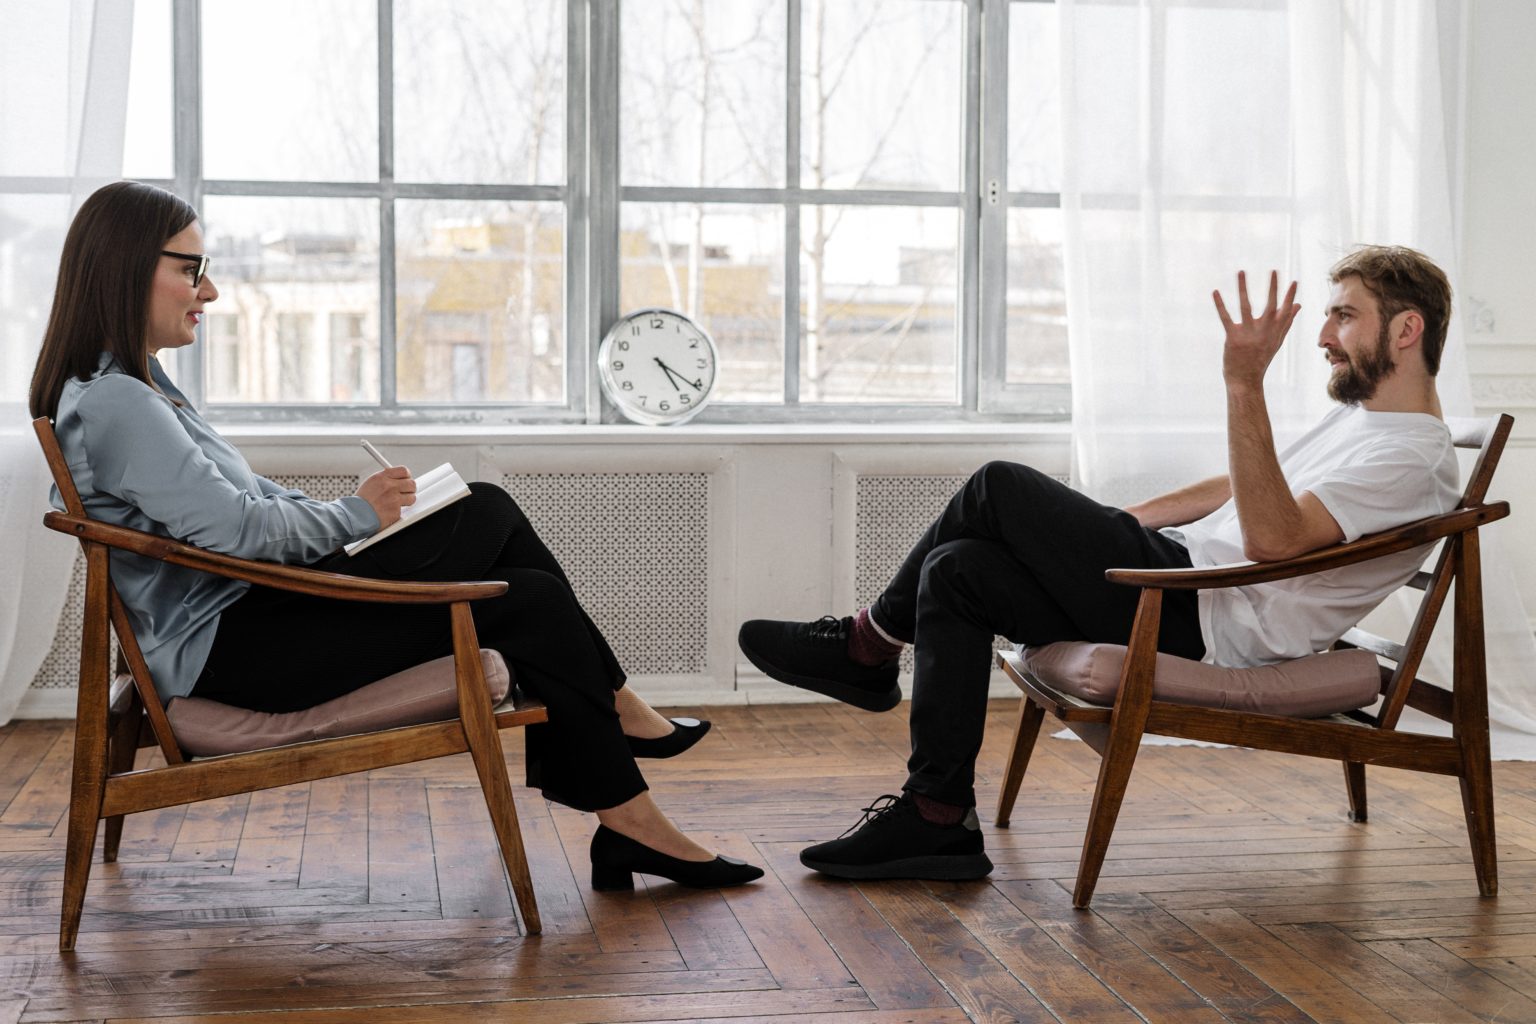 a man and a woman sitting in chairs in a room with a clock